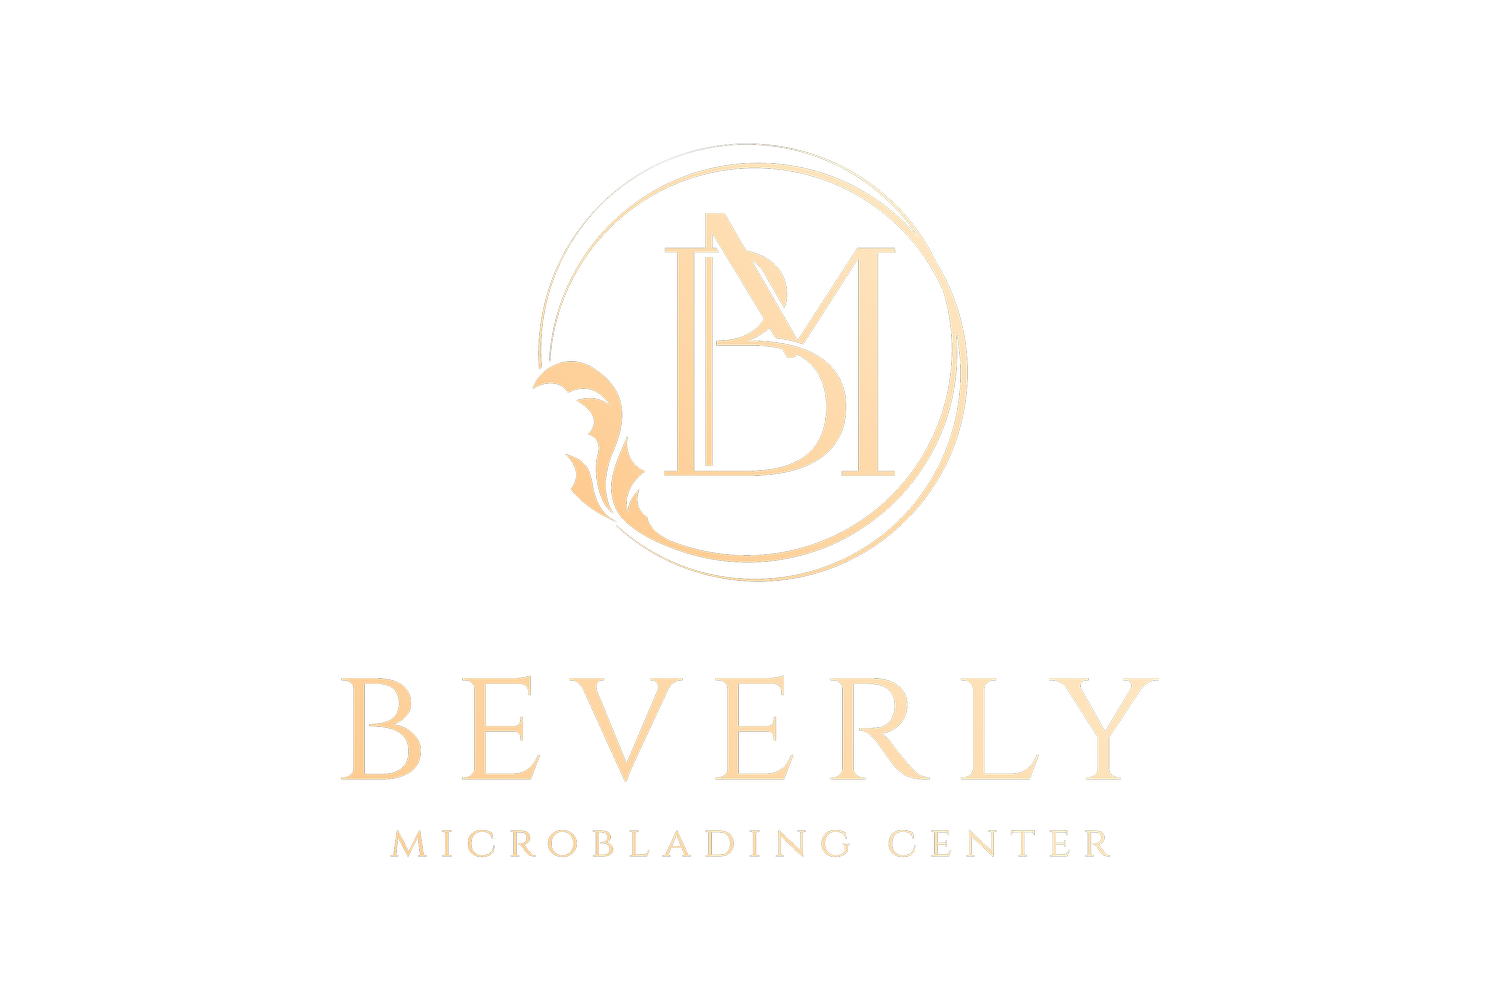 Beverly Microblading Center